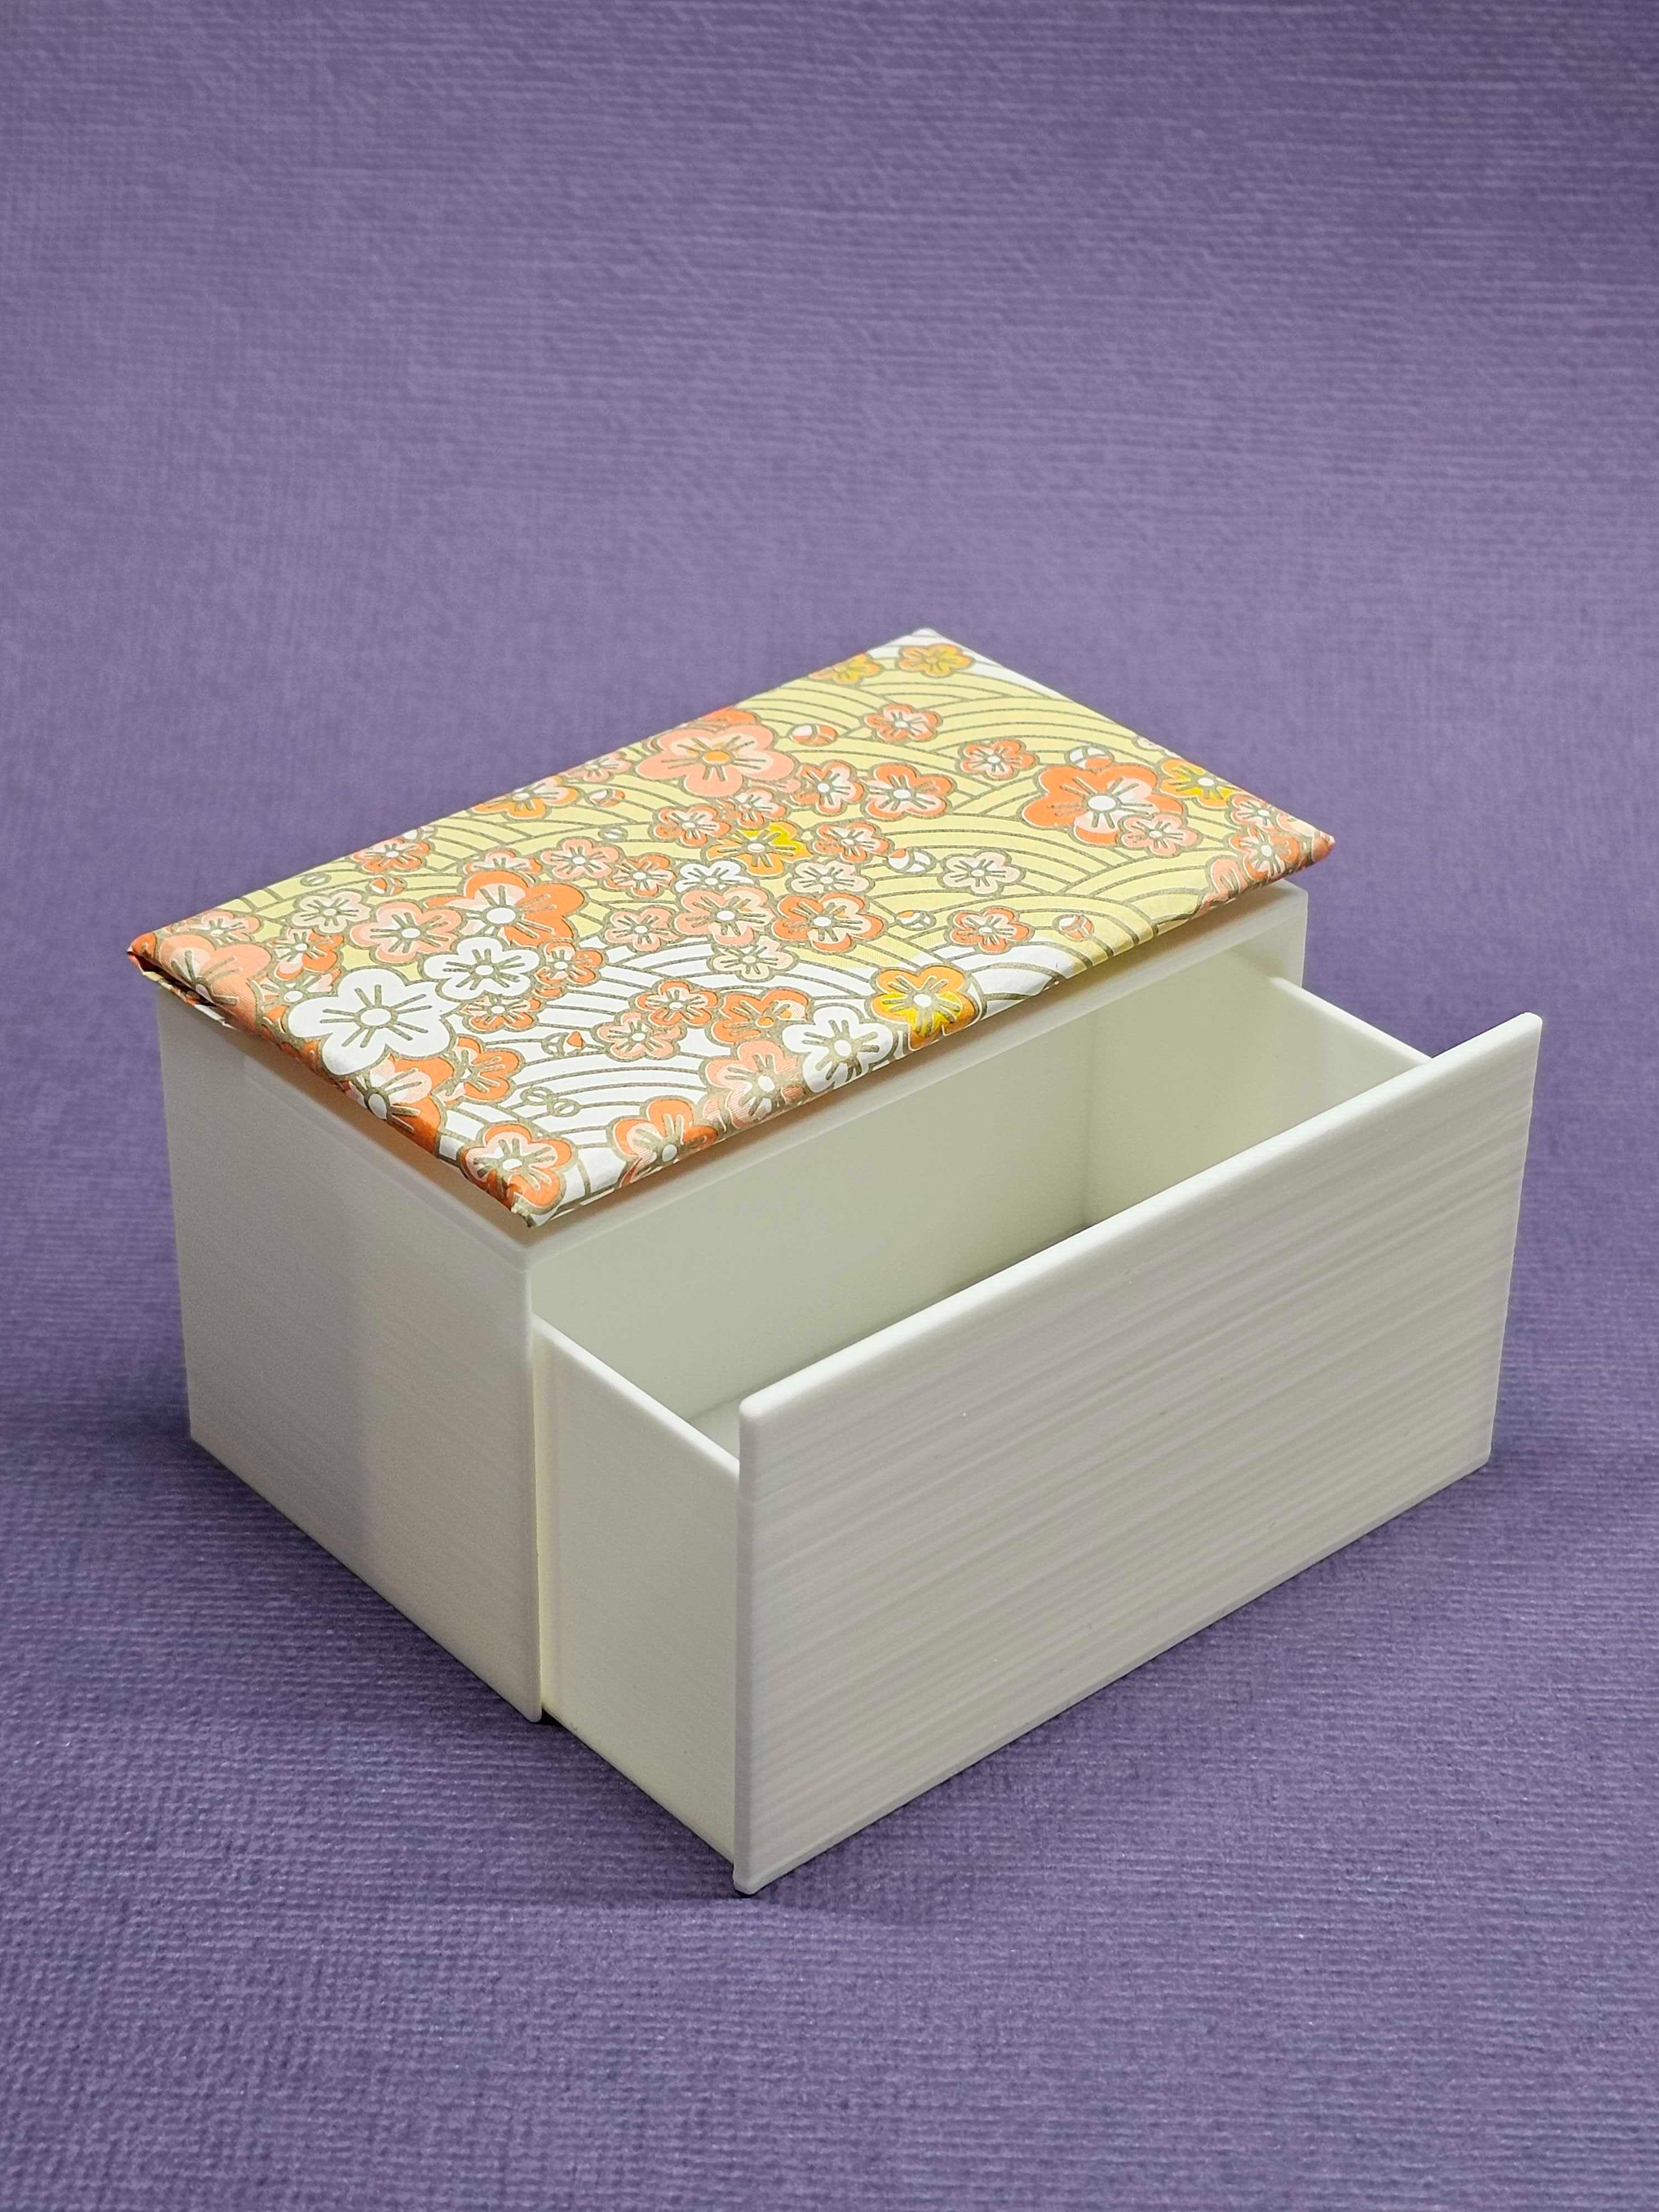 Seat cushions for miniature bench | 1:12 scale dollhouse furniture | Decorate w/ washi tape or paper 3d model